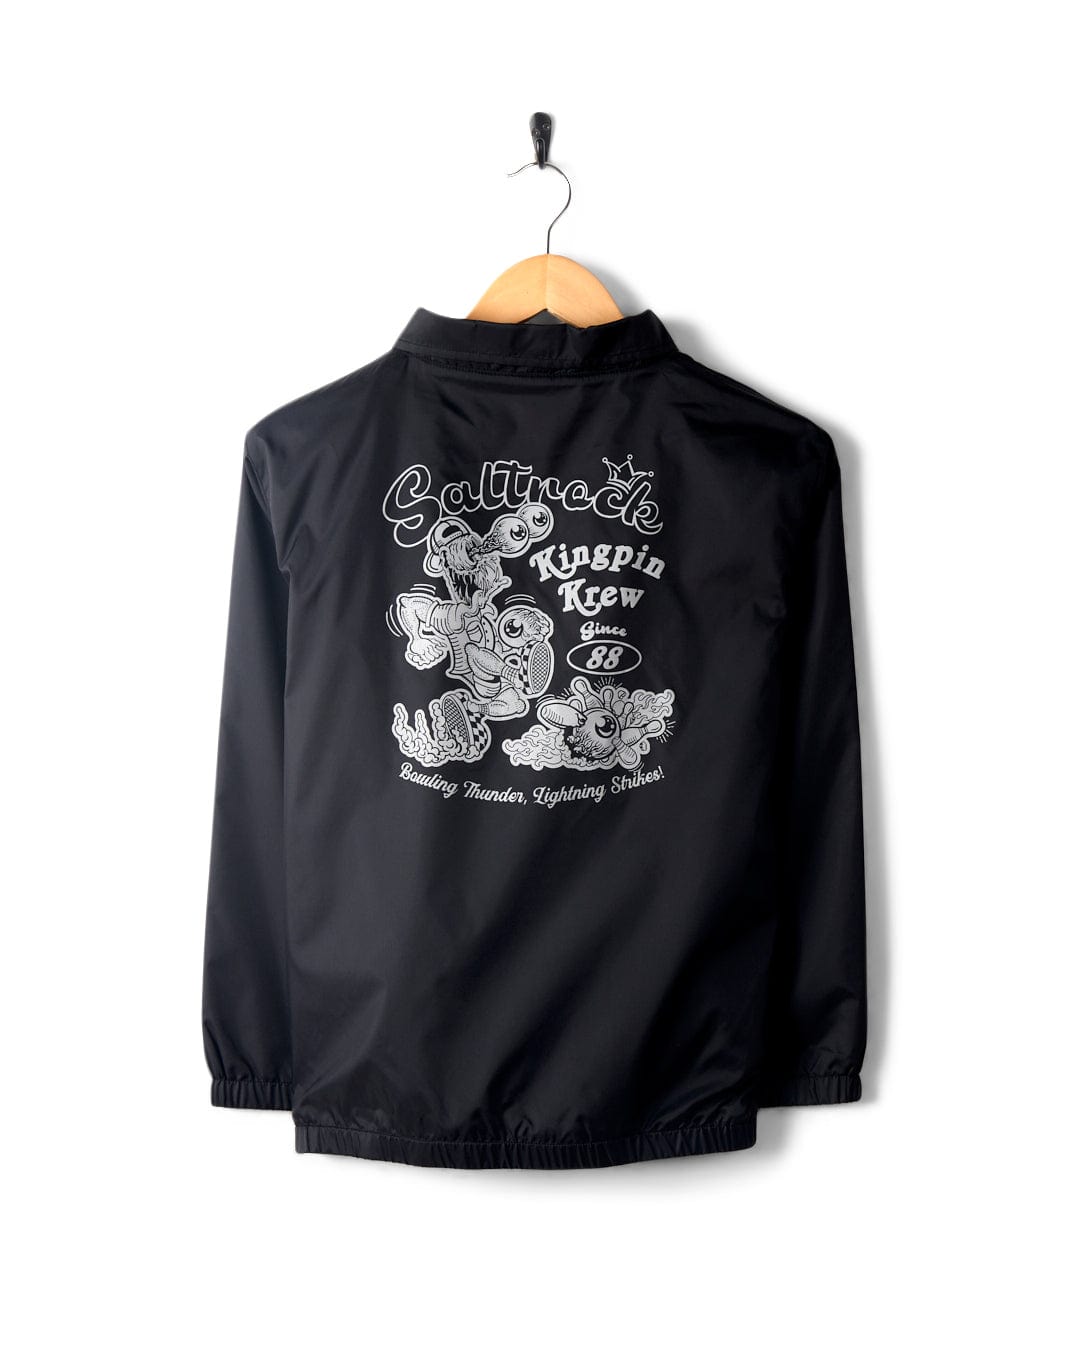 A Kingpin Krew - Kids Coach Jacket - Black with a detachable hood on a hanger featuring white graphic print with cartoon-style characters and text, displayed against a white background by Saltrock.